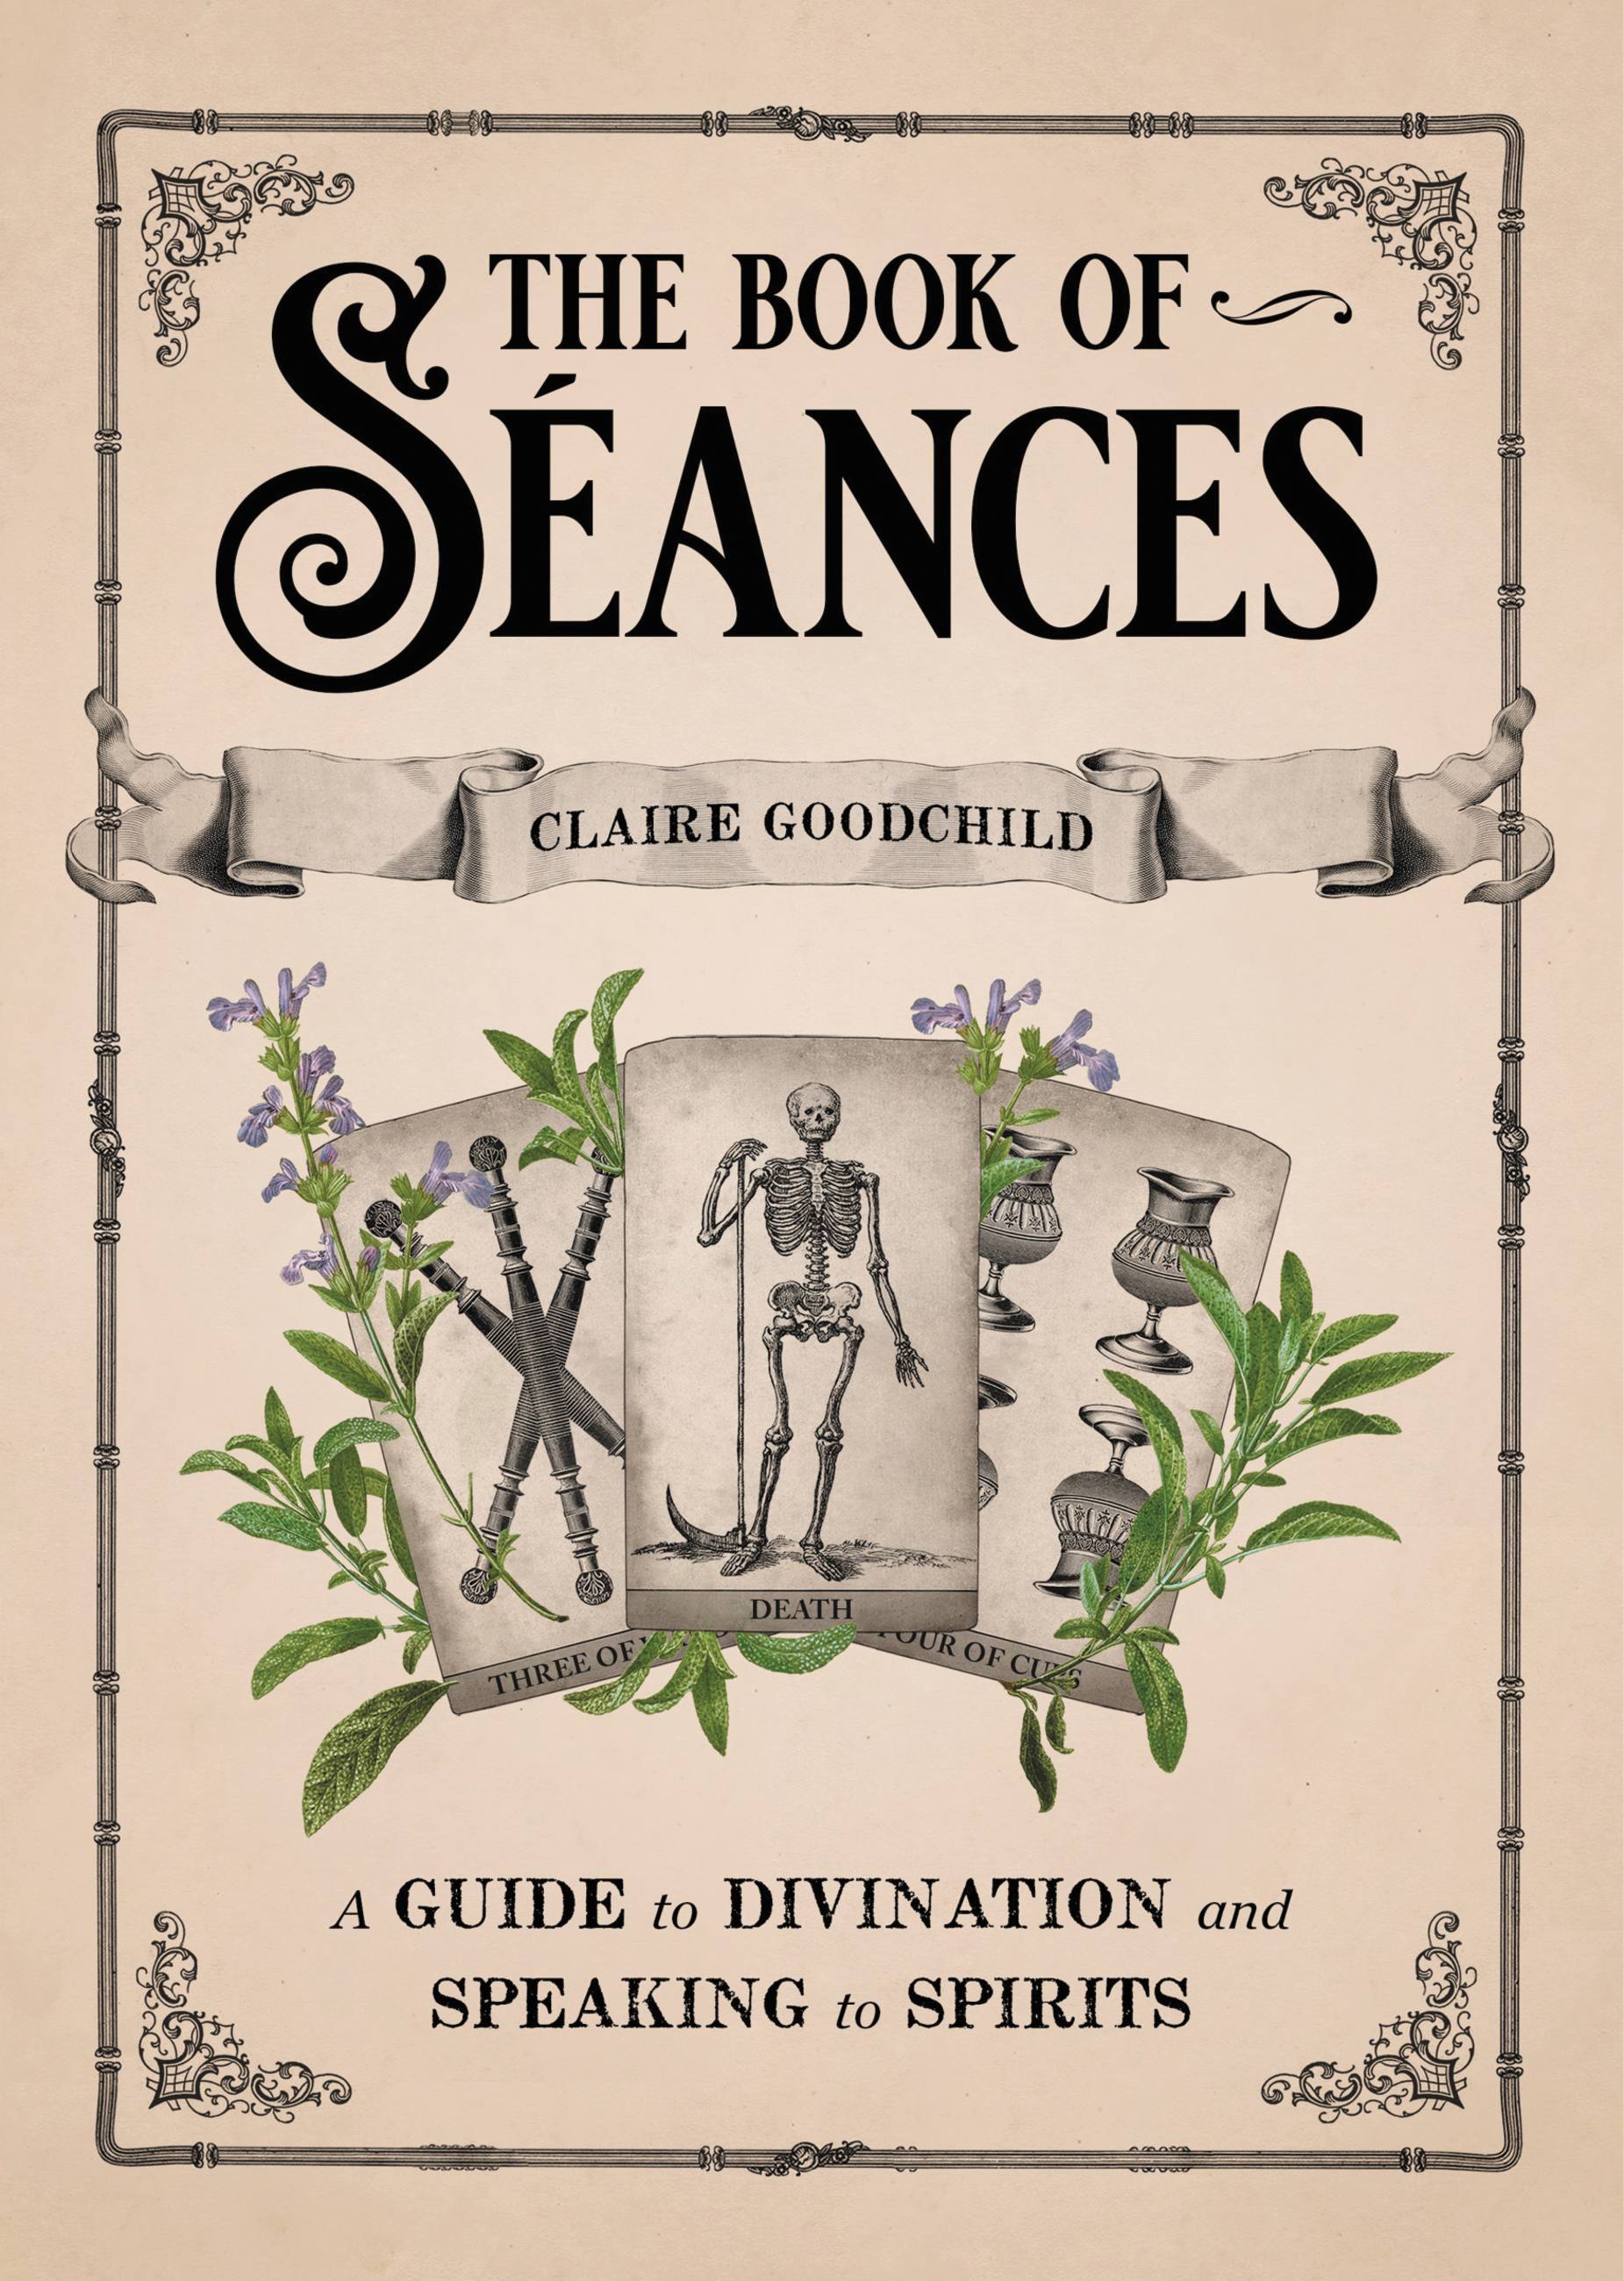 The Book of Séances by Claire Goodchild | Hachette Book Group